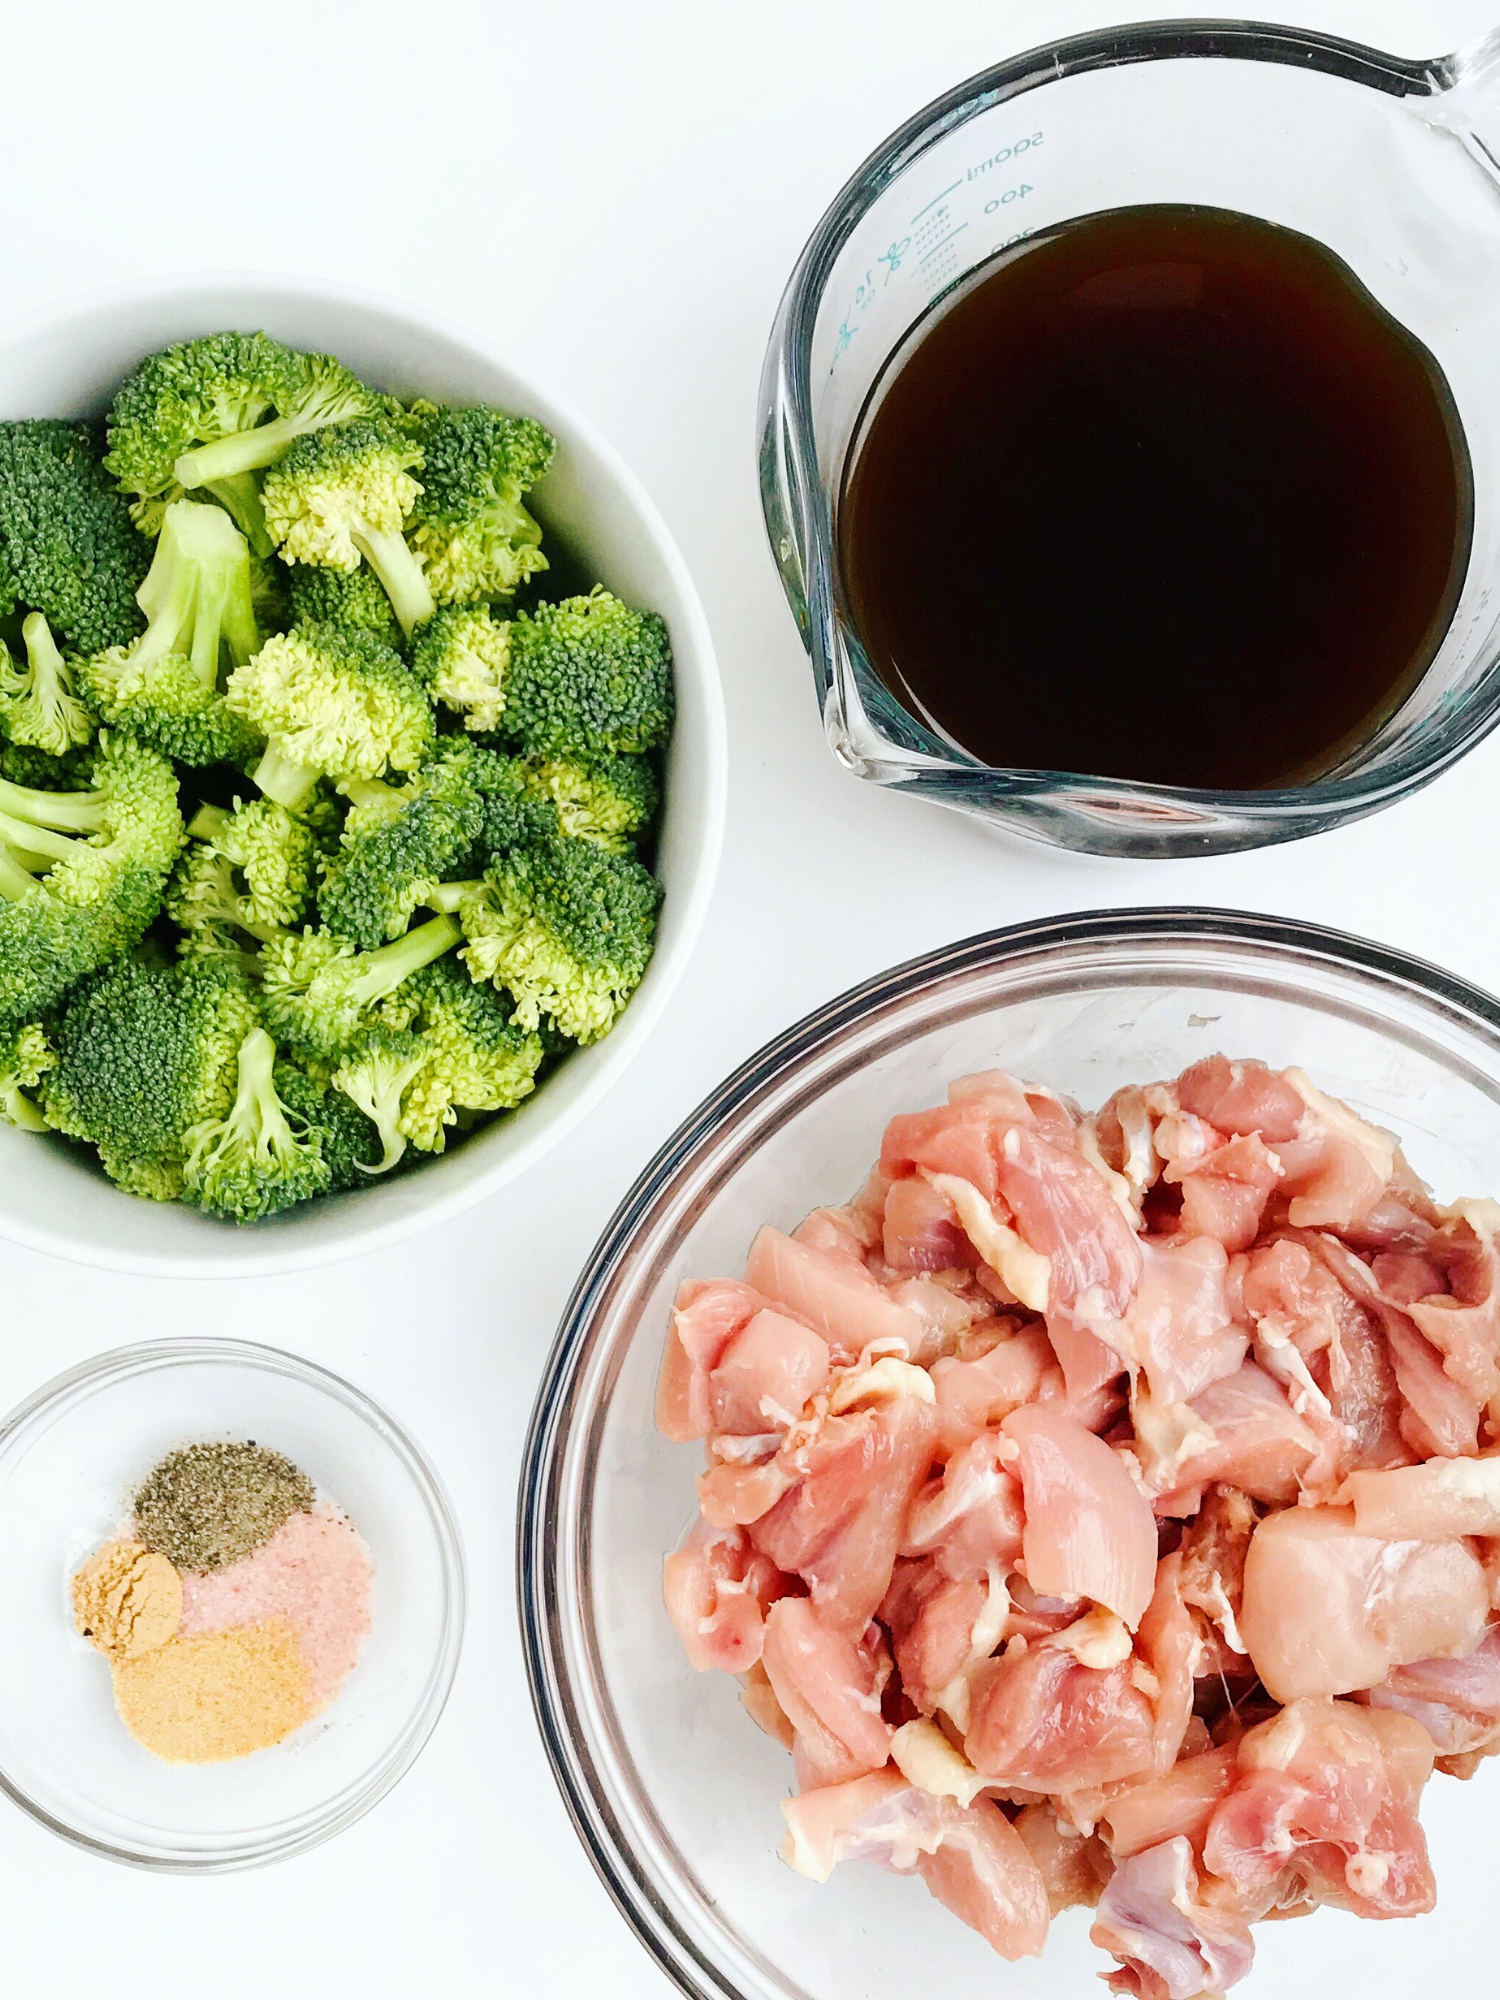 lean meat sliced in pieces in a bowl next to raw broccoli, a bowl of tamari and a bowl of seasonings. All food that would be simple and delicious for a GERD friendly diet